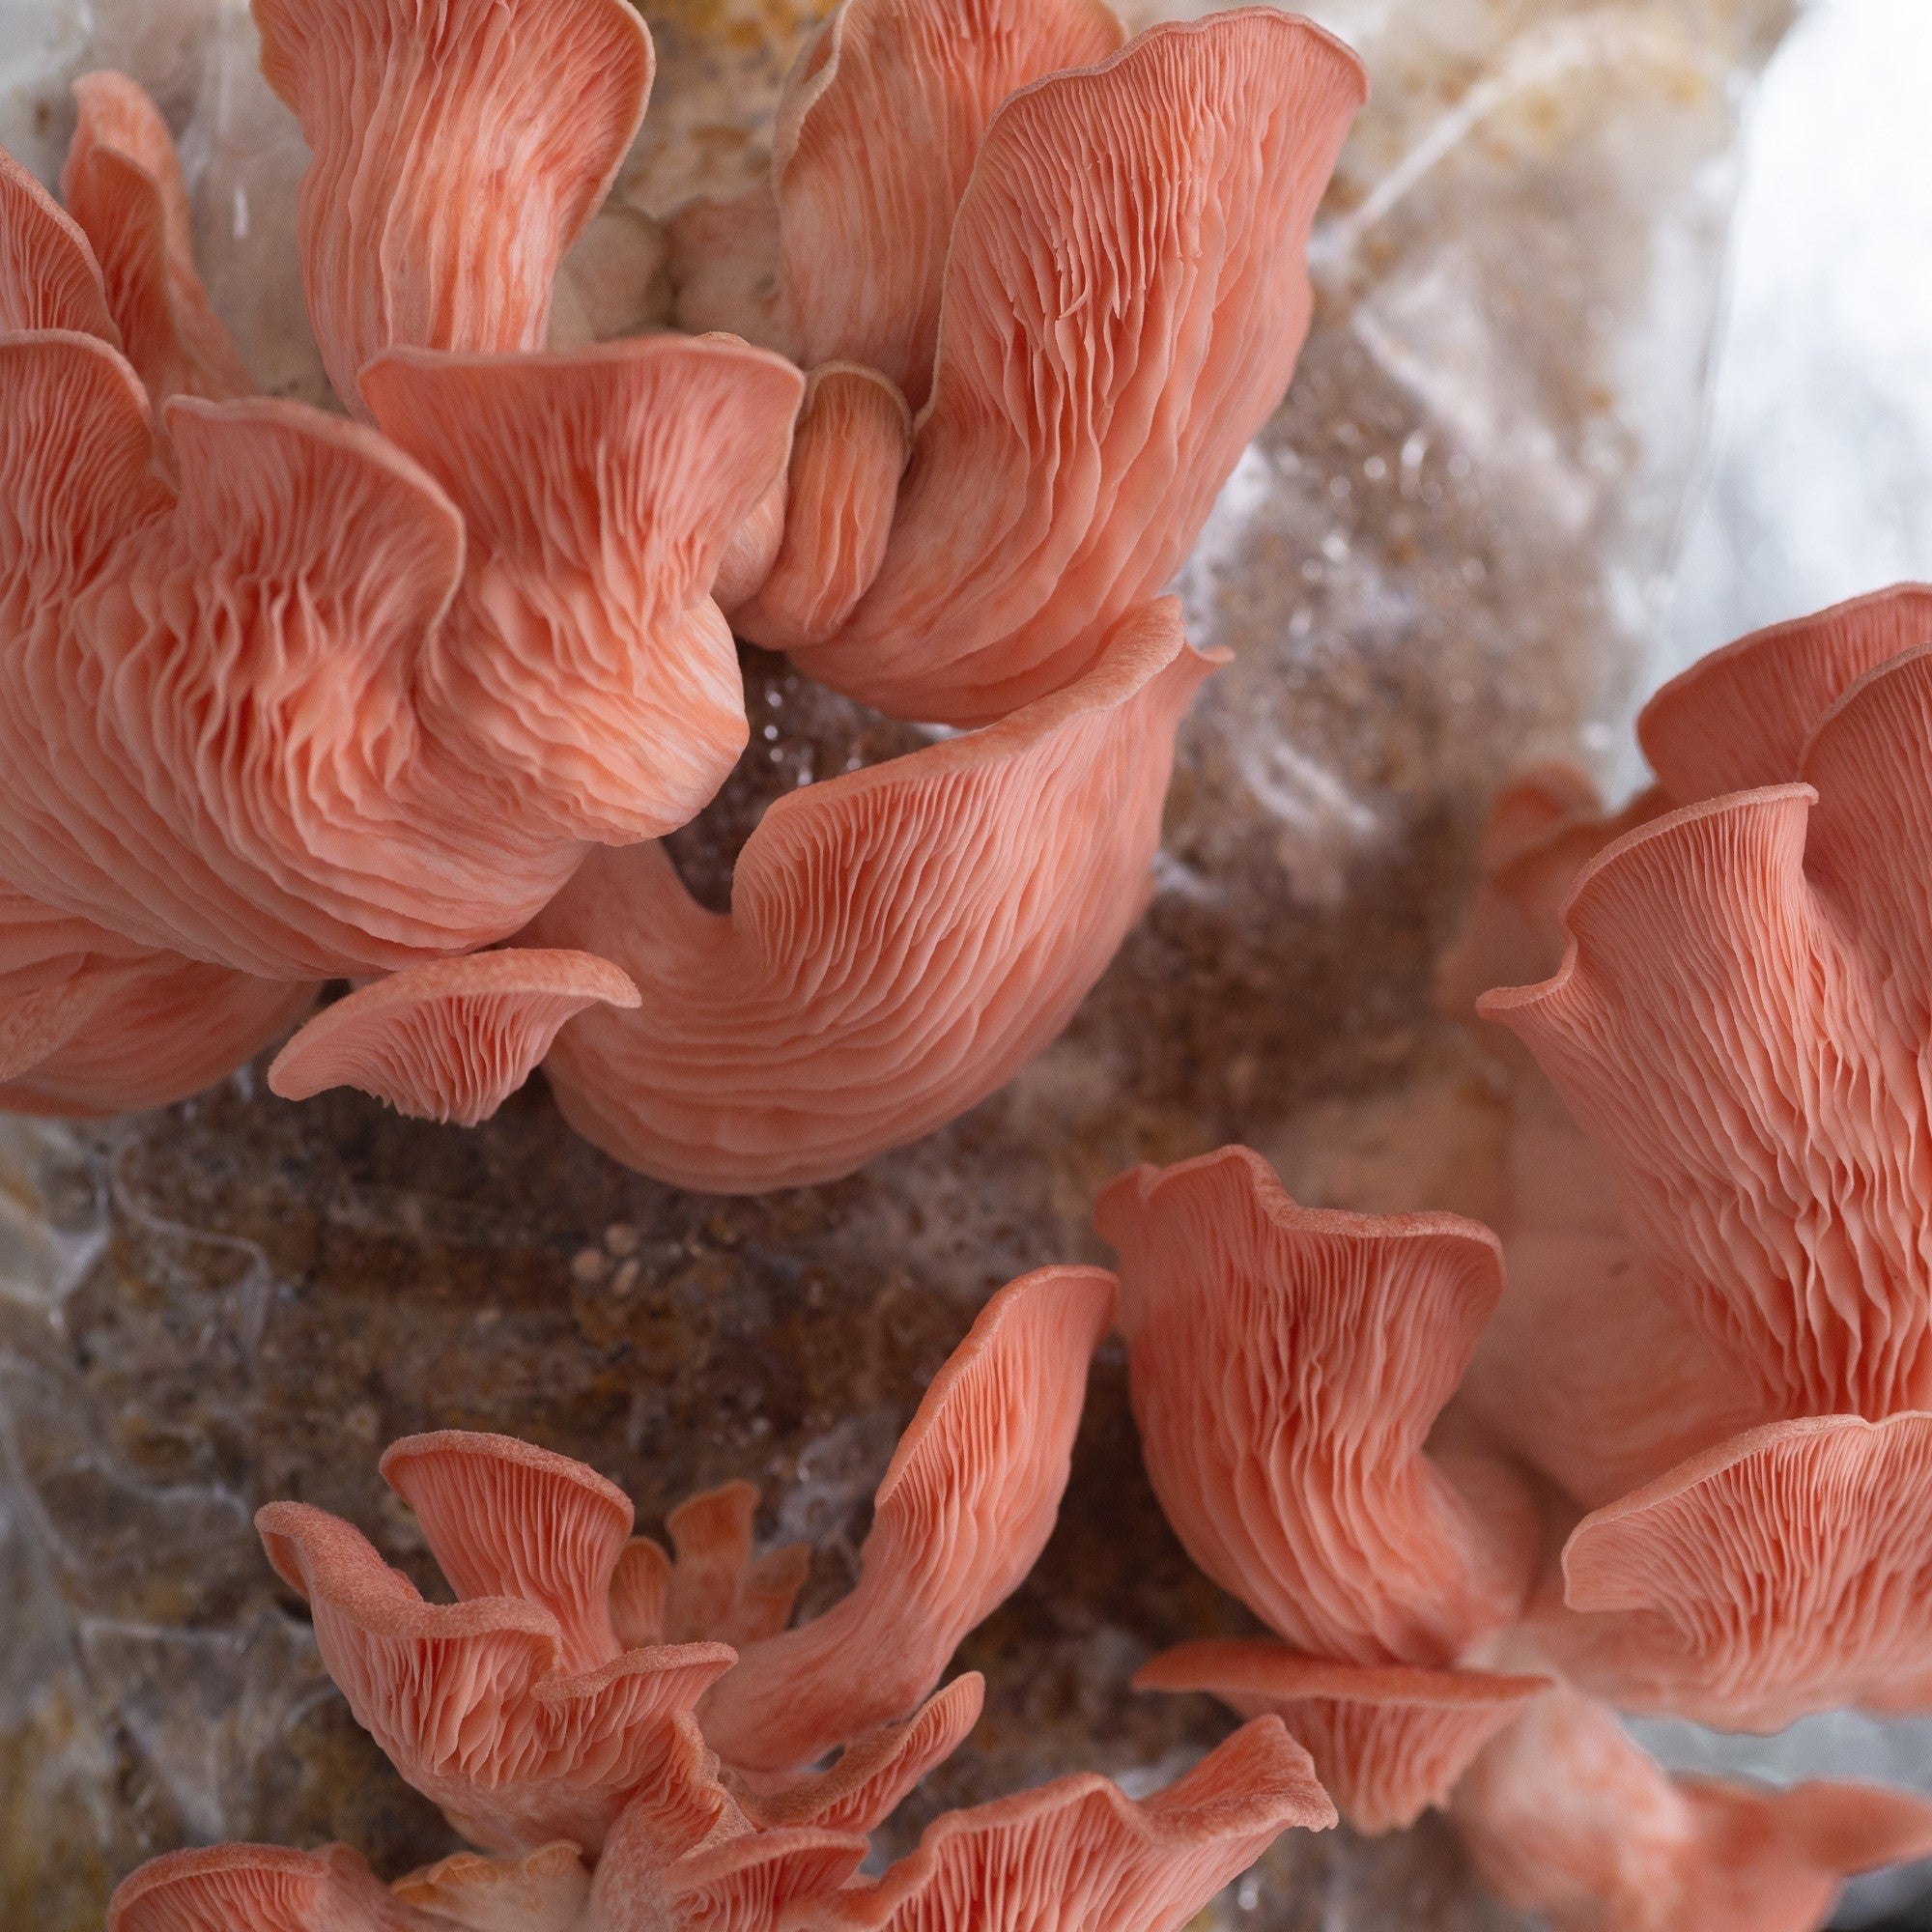 Our Best Tips for Growing Mushrooms at Home